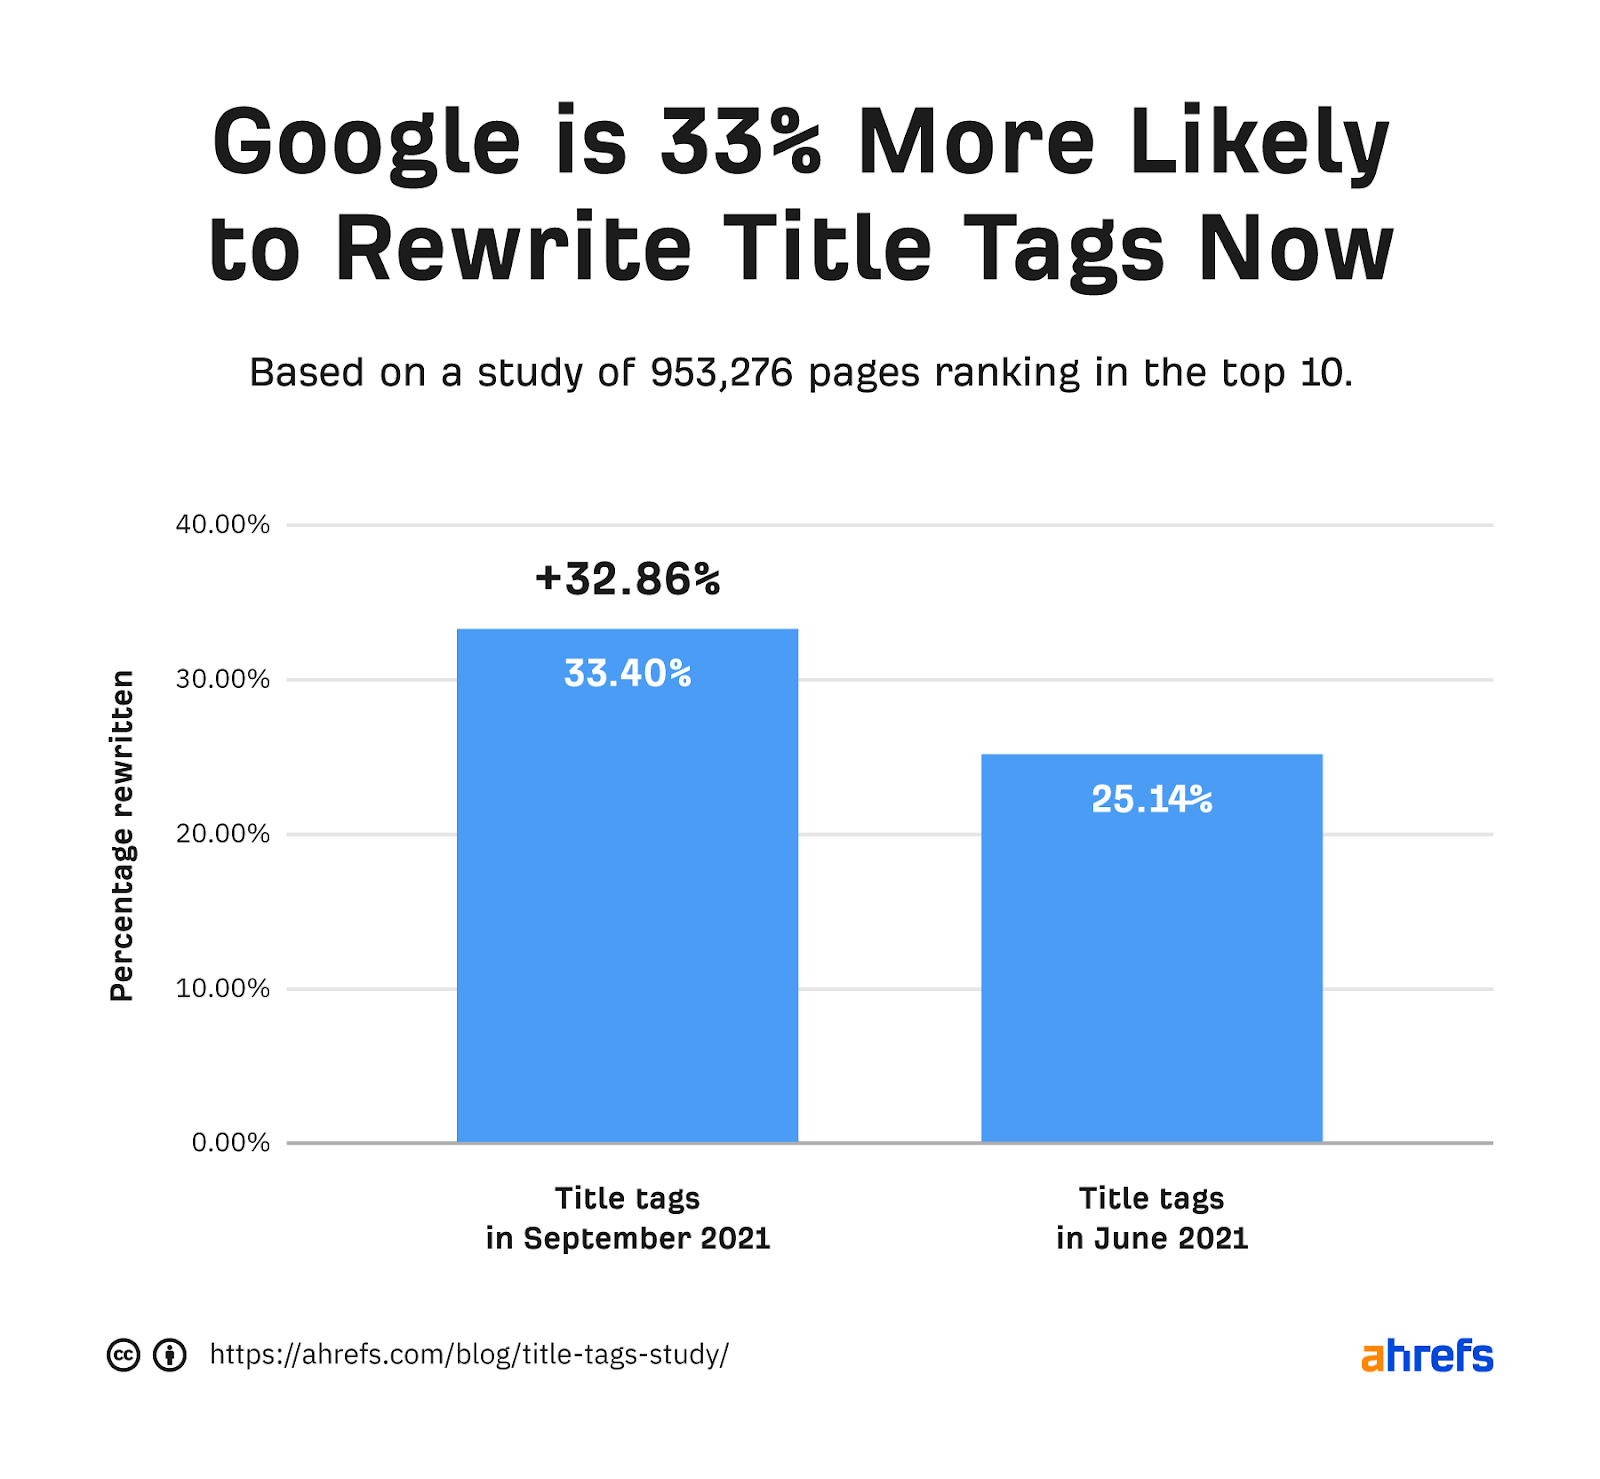 Google was more likely to rewrite titles in September 2021 than in June 2021